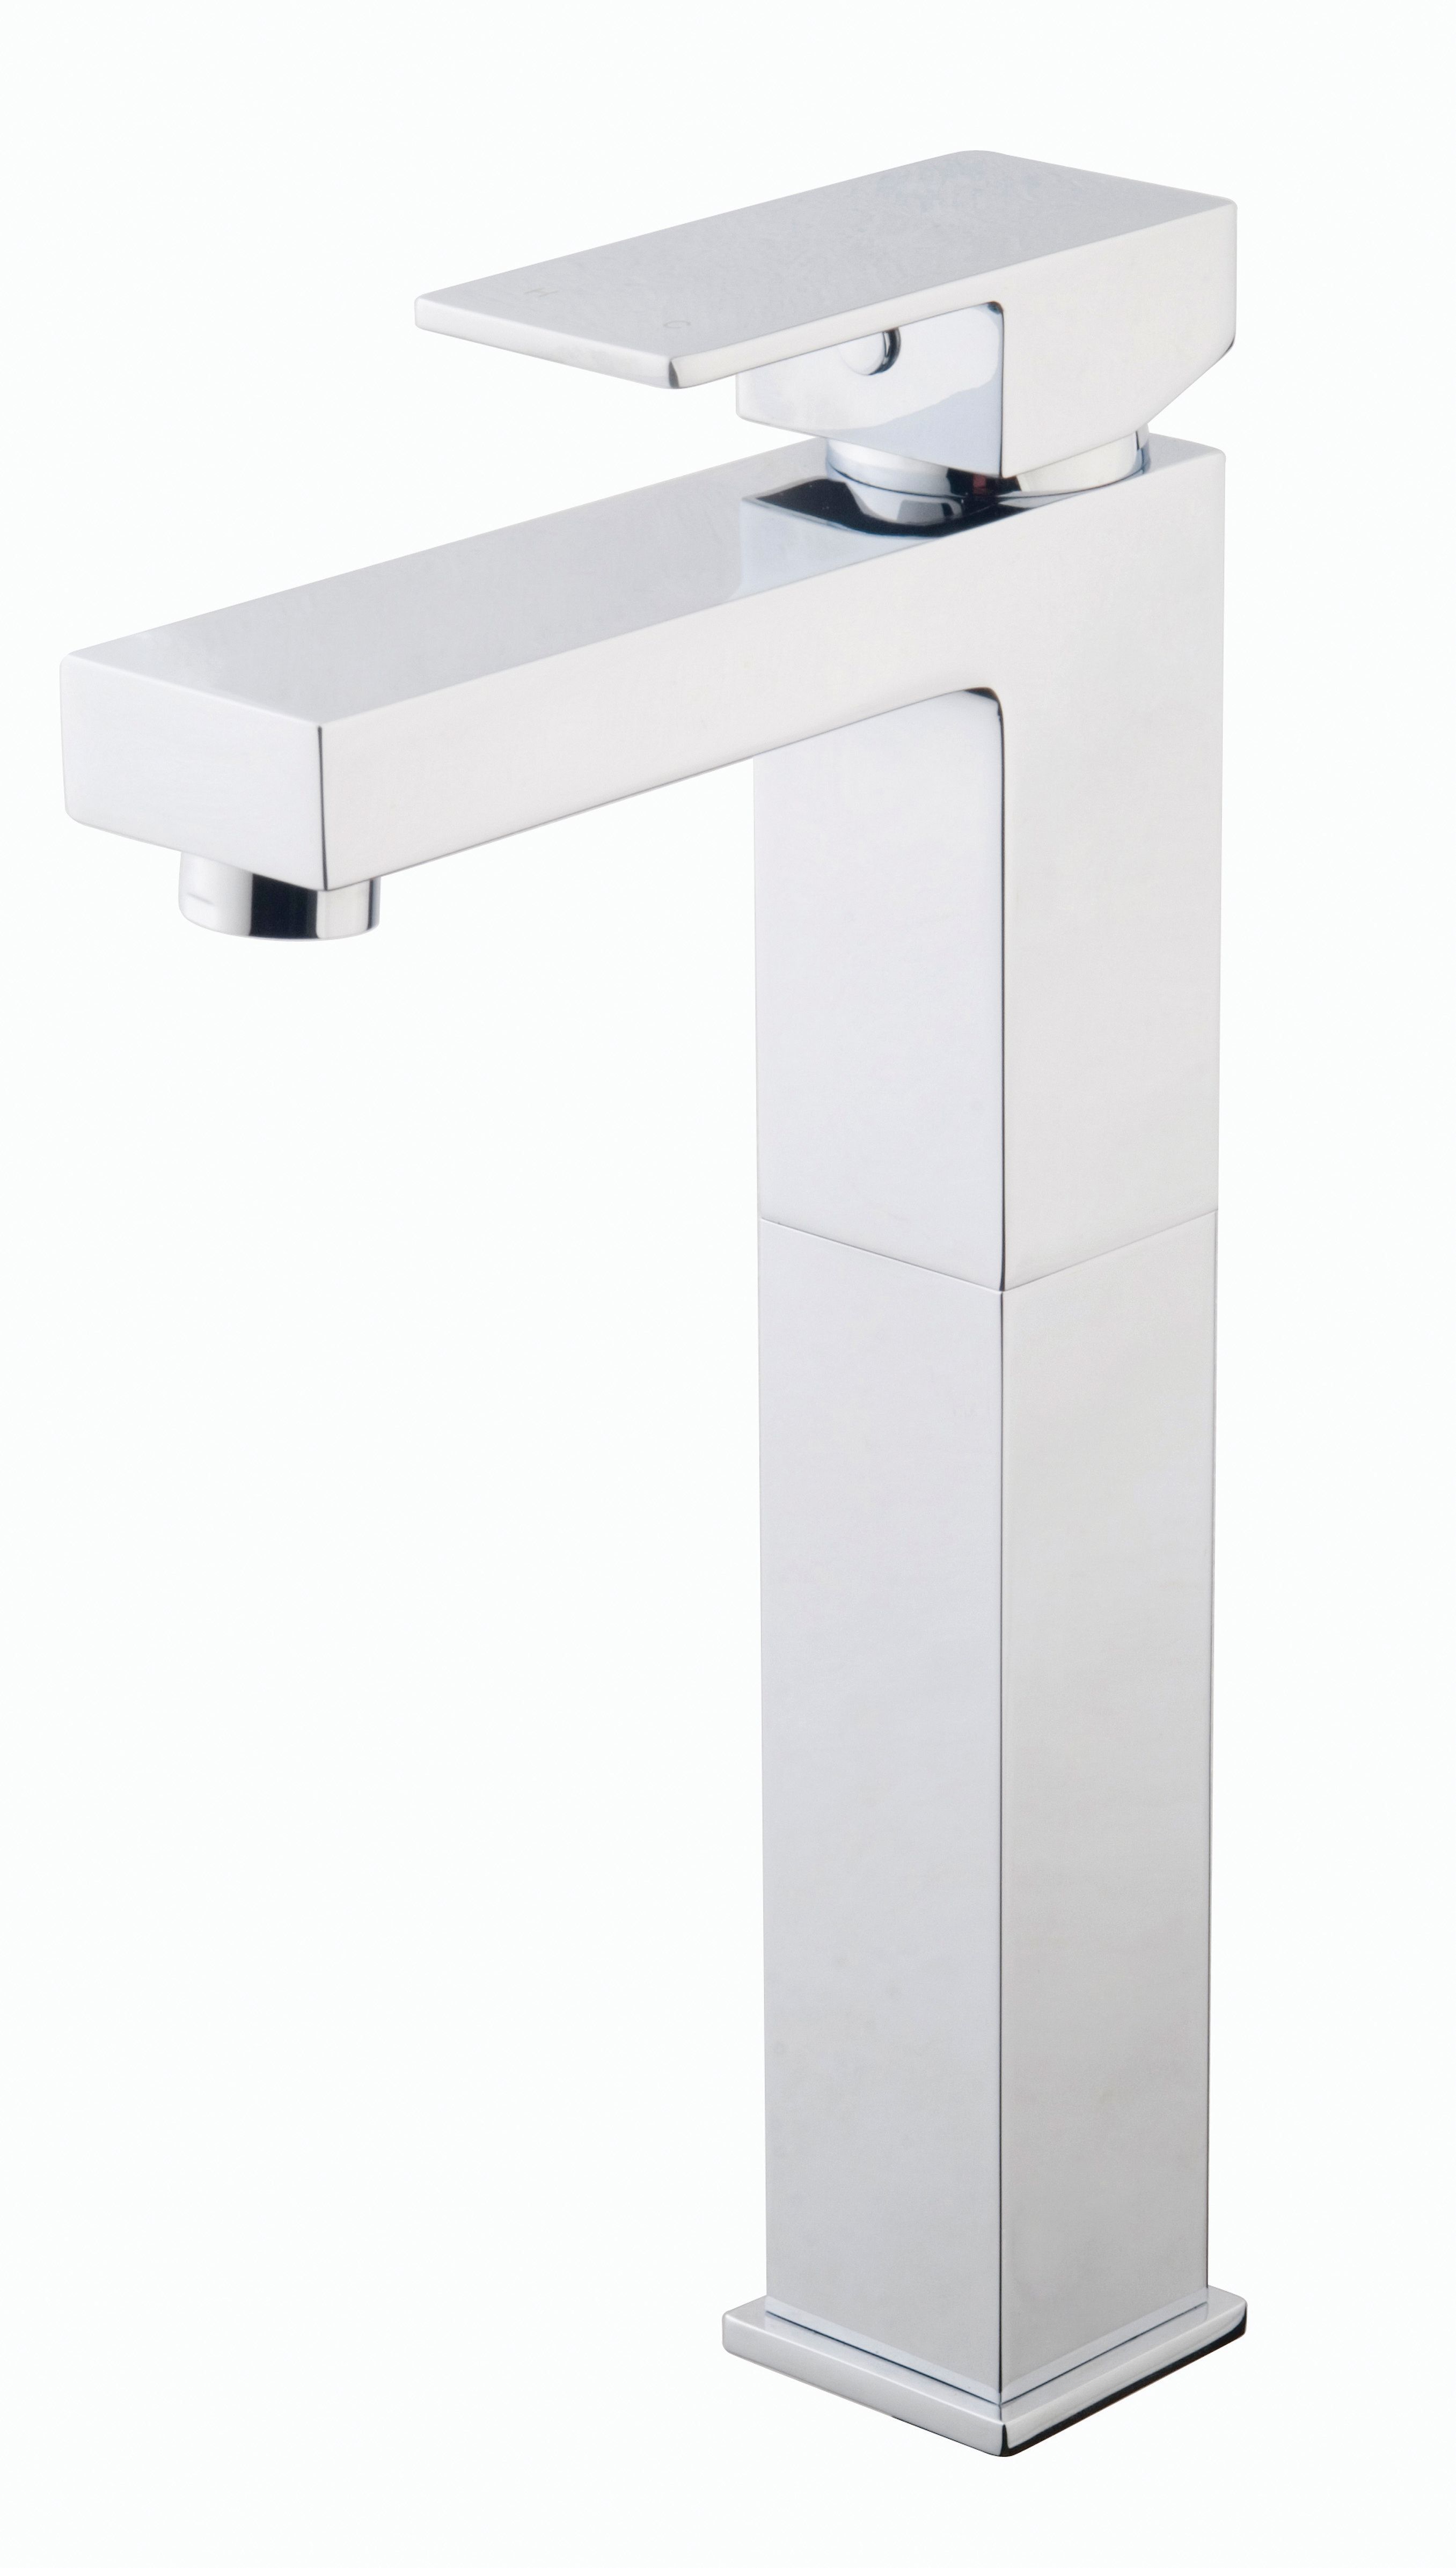 Image of Wickes Kubic Chrome Tall Basin Mixer Tap